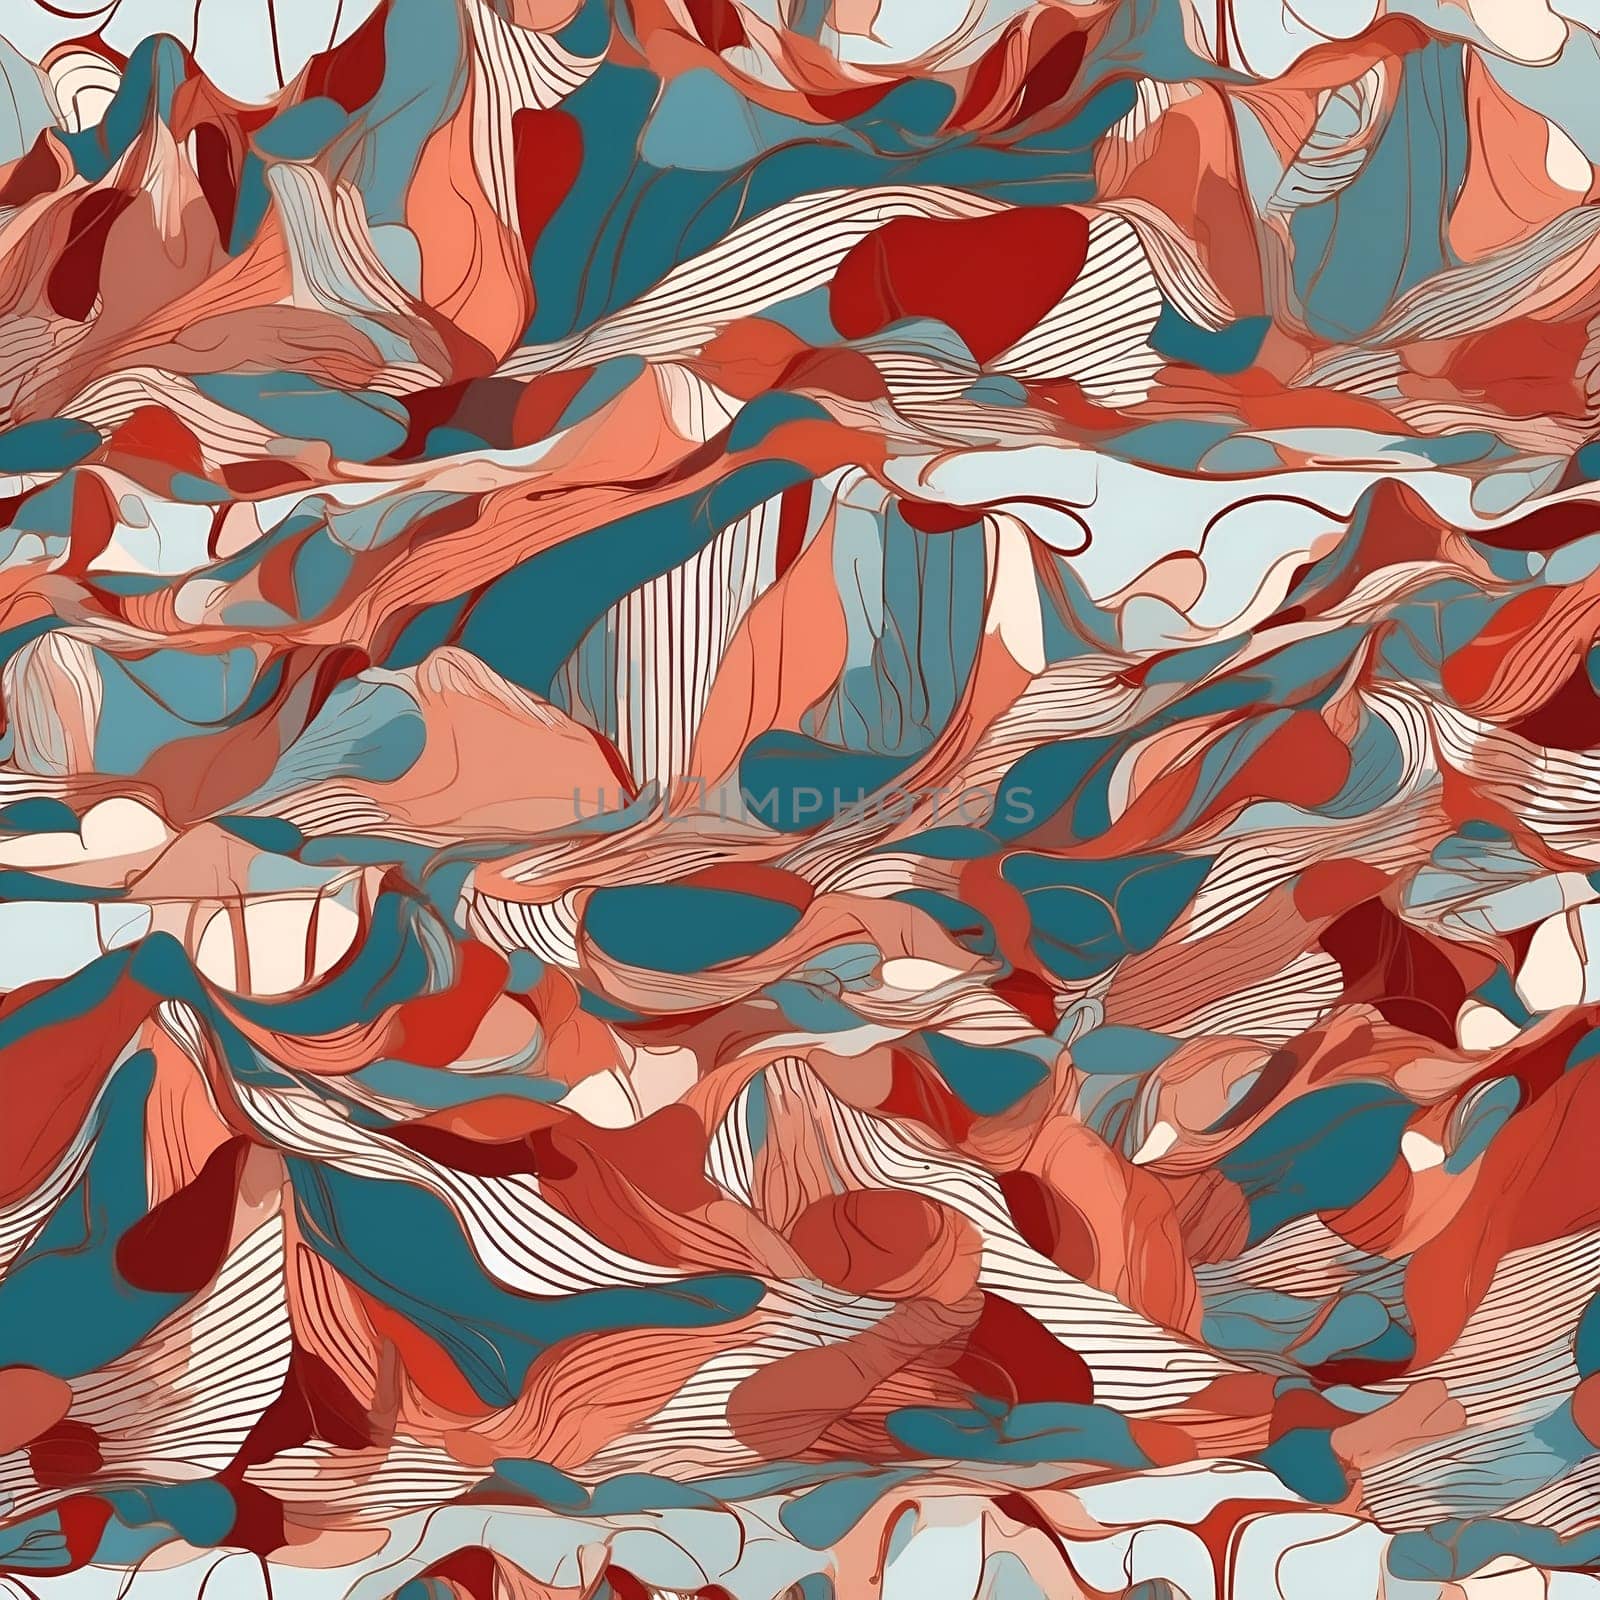 This abstract painting features a seamlessly patterned design of red and blue waves.